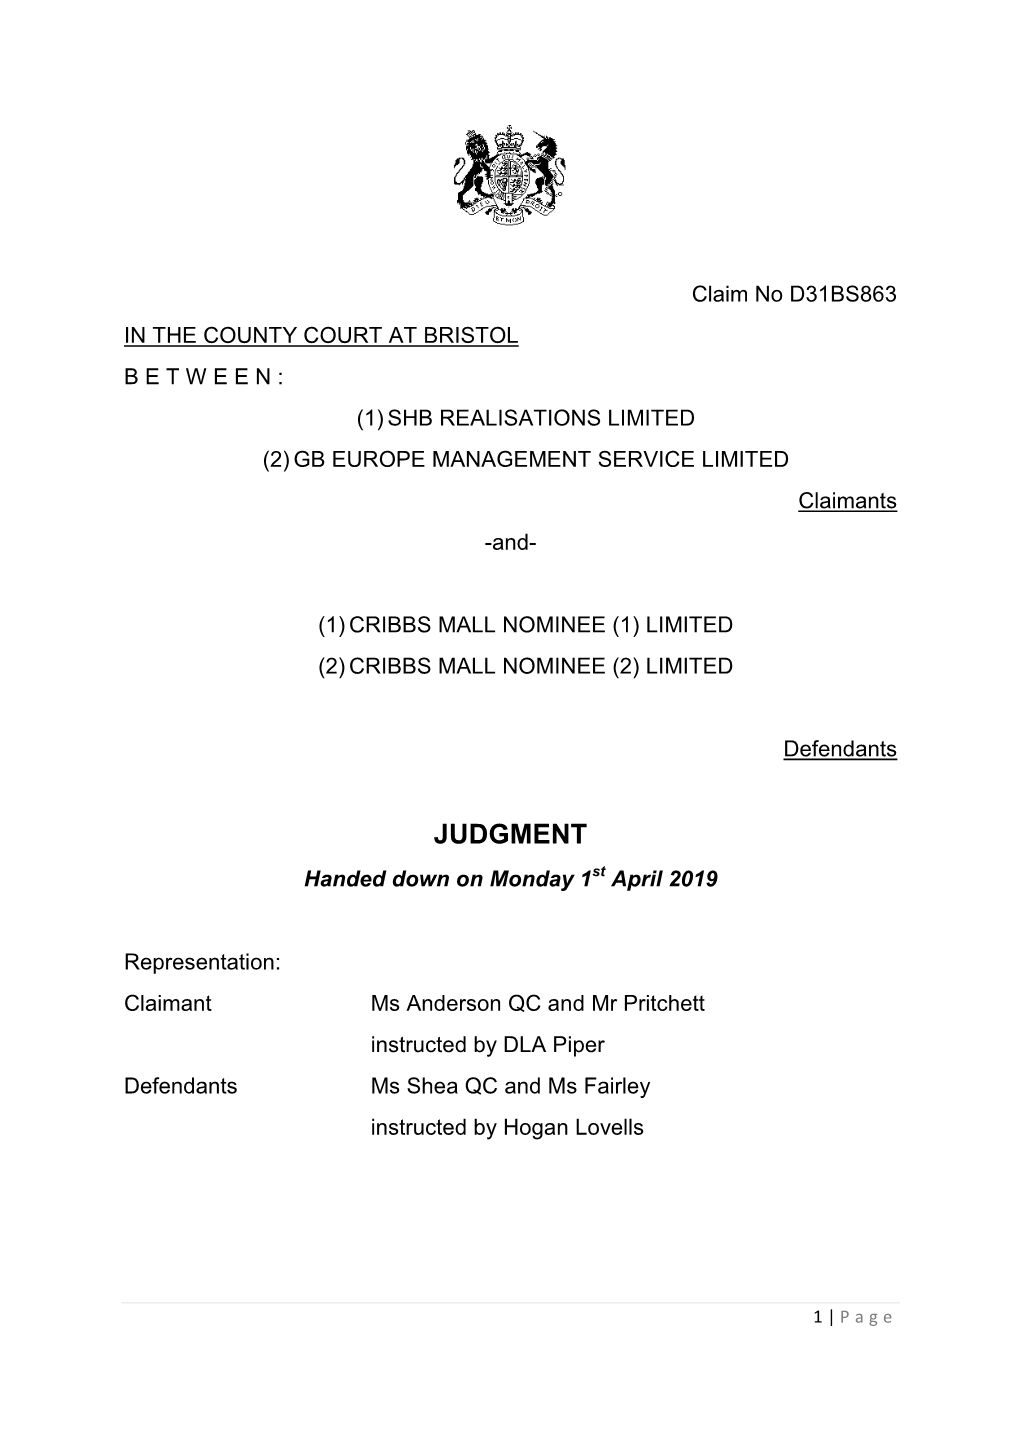 JUDGMENT Handed Down on Monday 1St April 2019